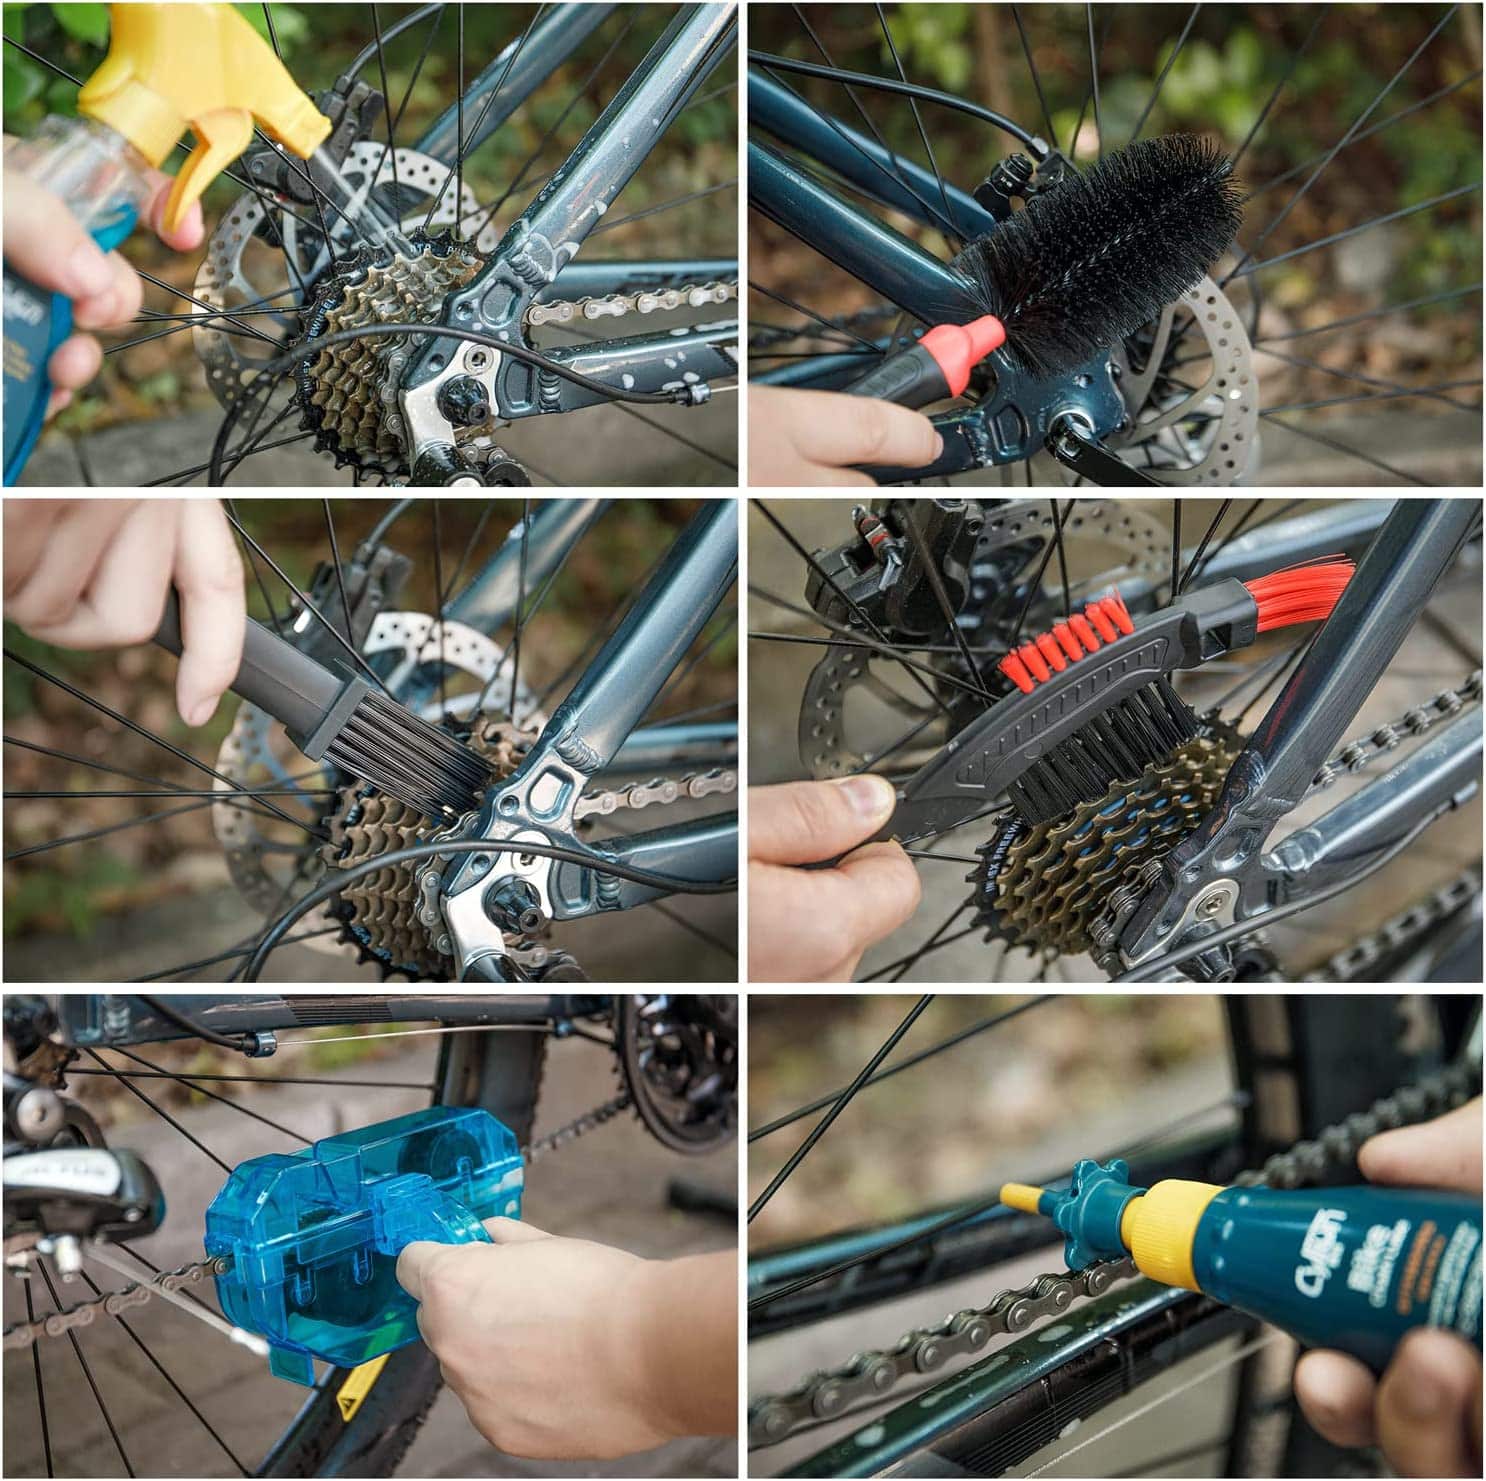 Before starting with the installation of your new mountain bike chain clean the drivetrain properly with a cleaning kit.